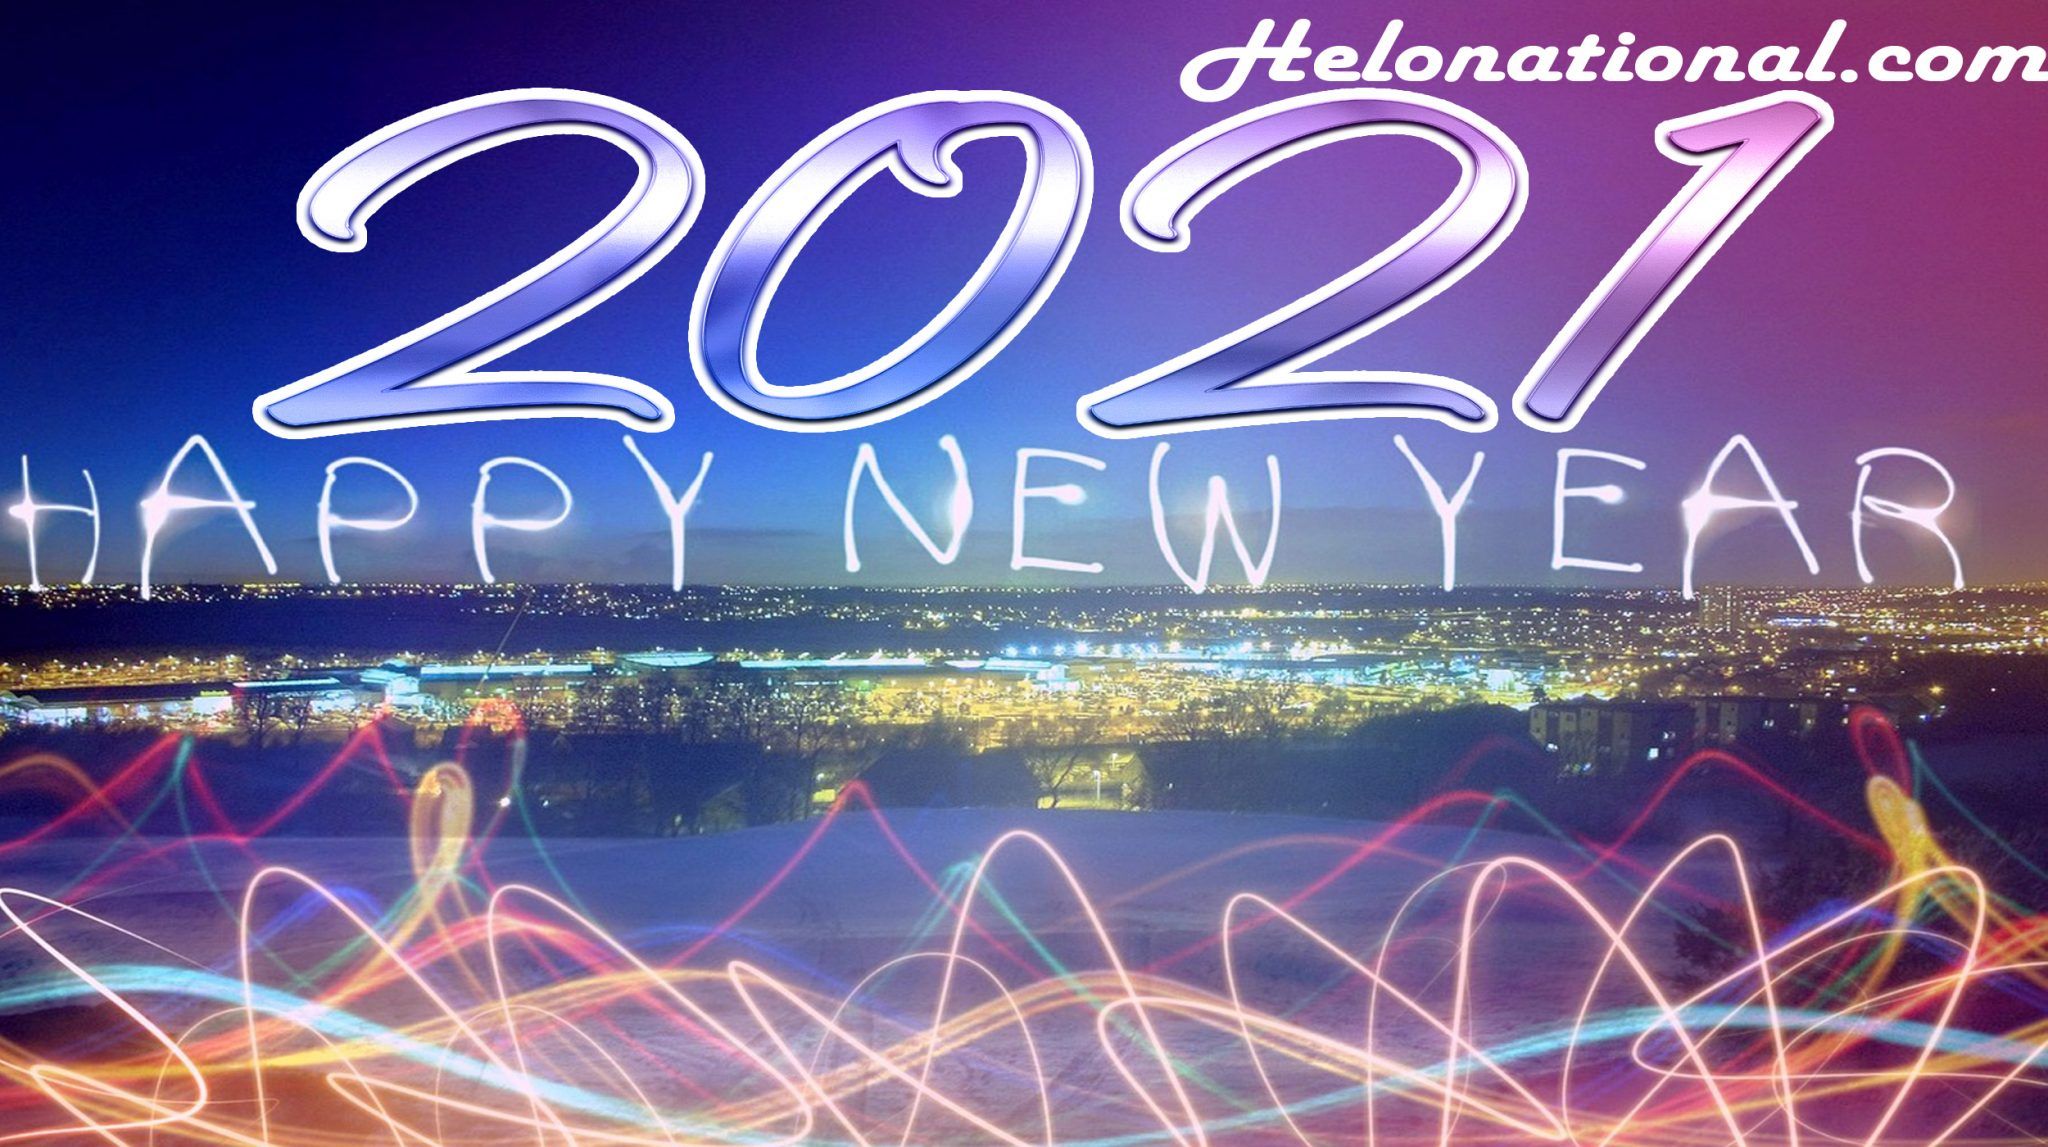 Happy New Year 2021: Image, Wishes, Quotes, Celebrations, Jokes, Cards, Wallpaper, Photo